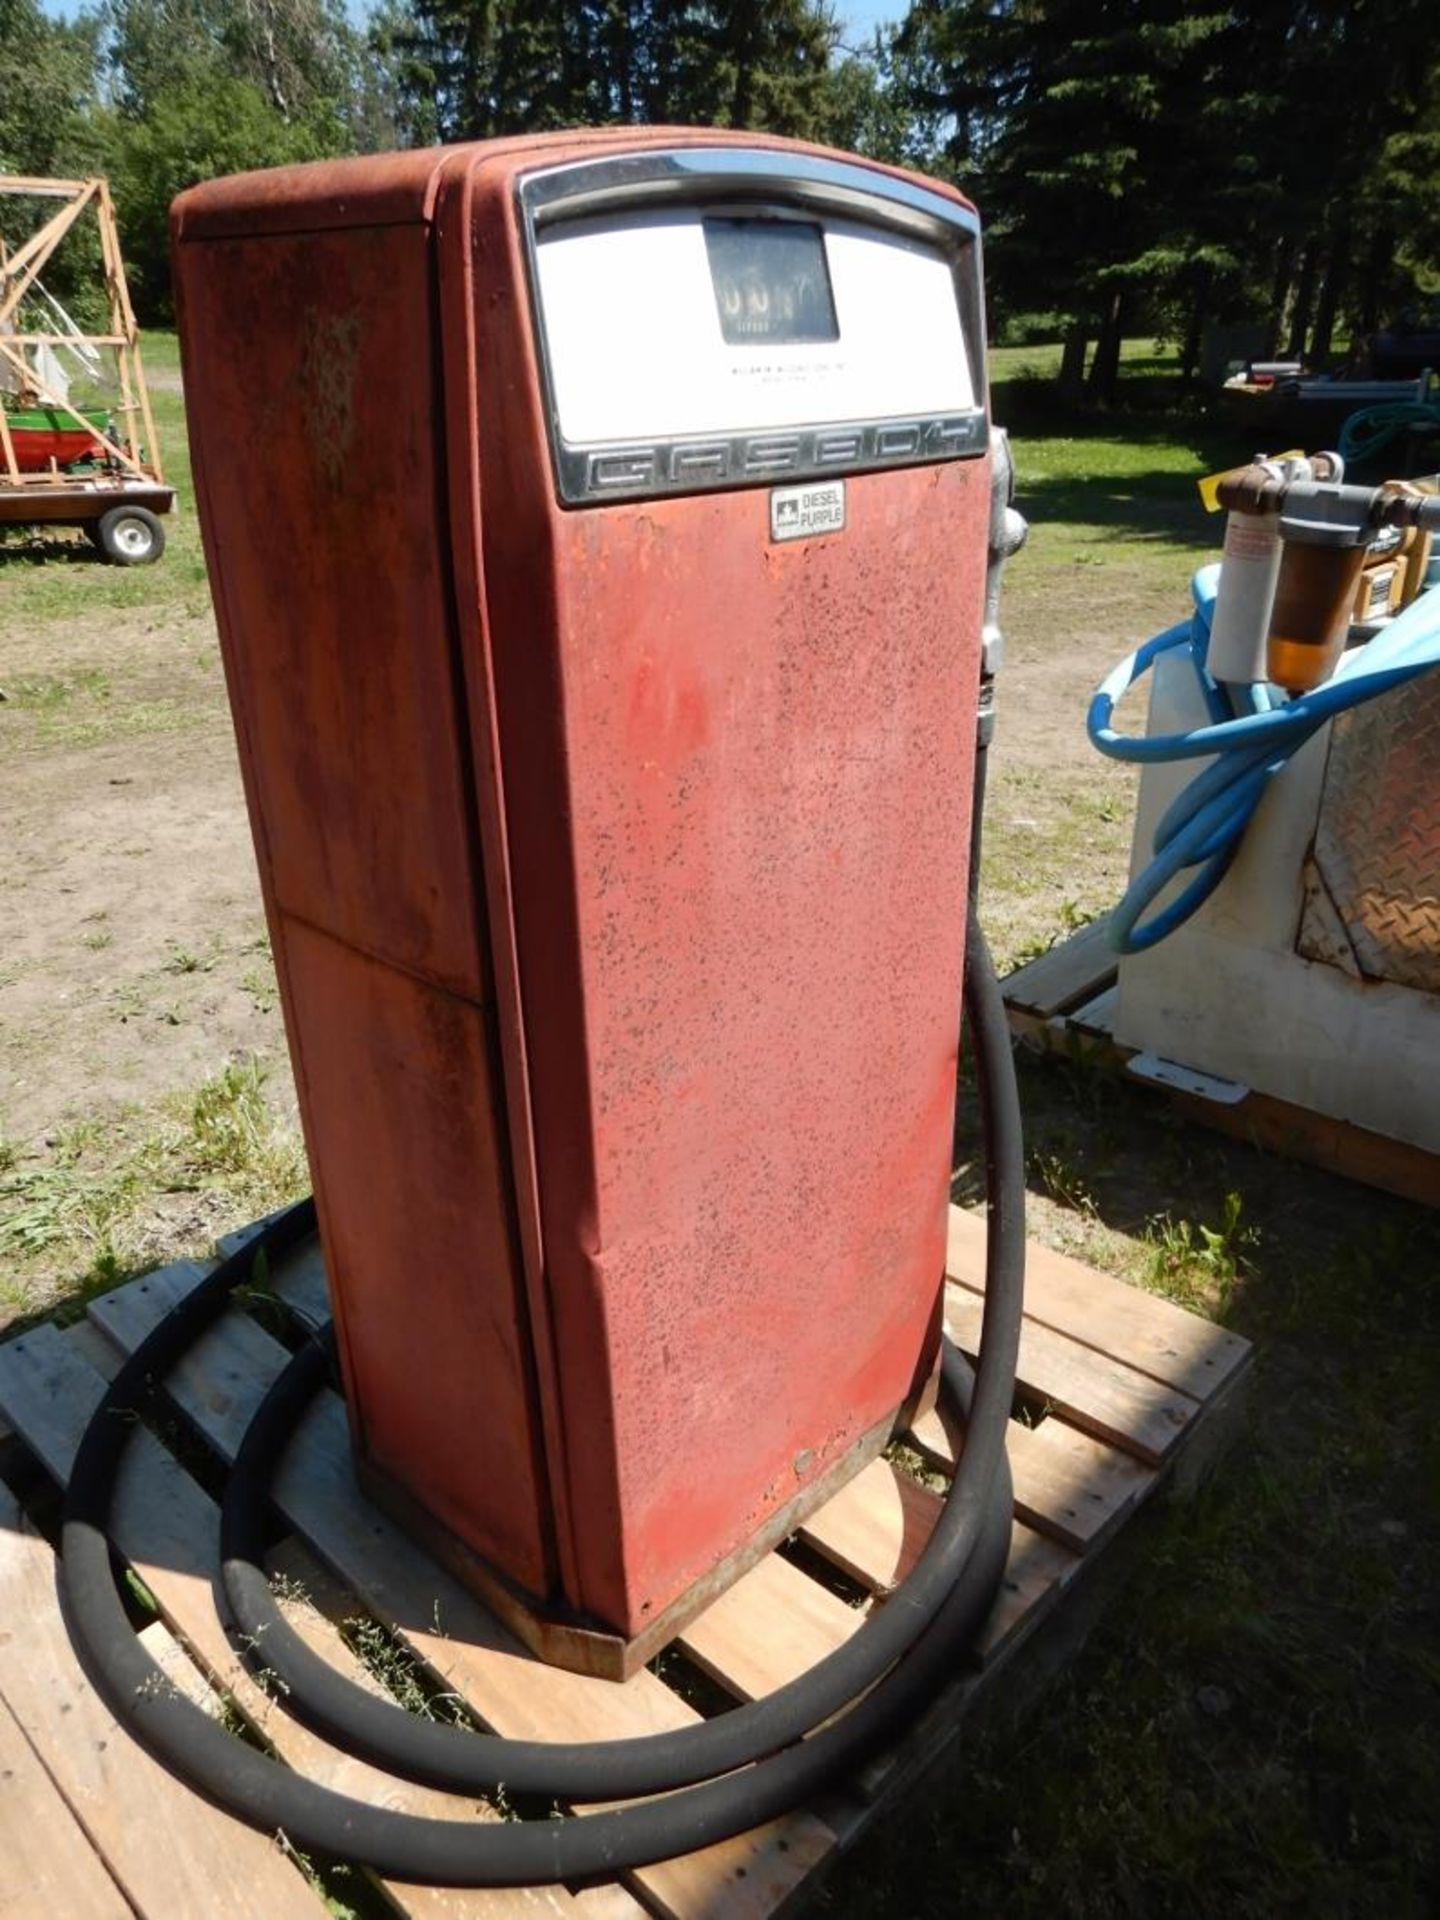 VINTAGE GAS BOY #53 GAS STATION FUEL PUMP S/N 1221 (SAID TO BE WORKING GOOD) - Image 3 of 7